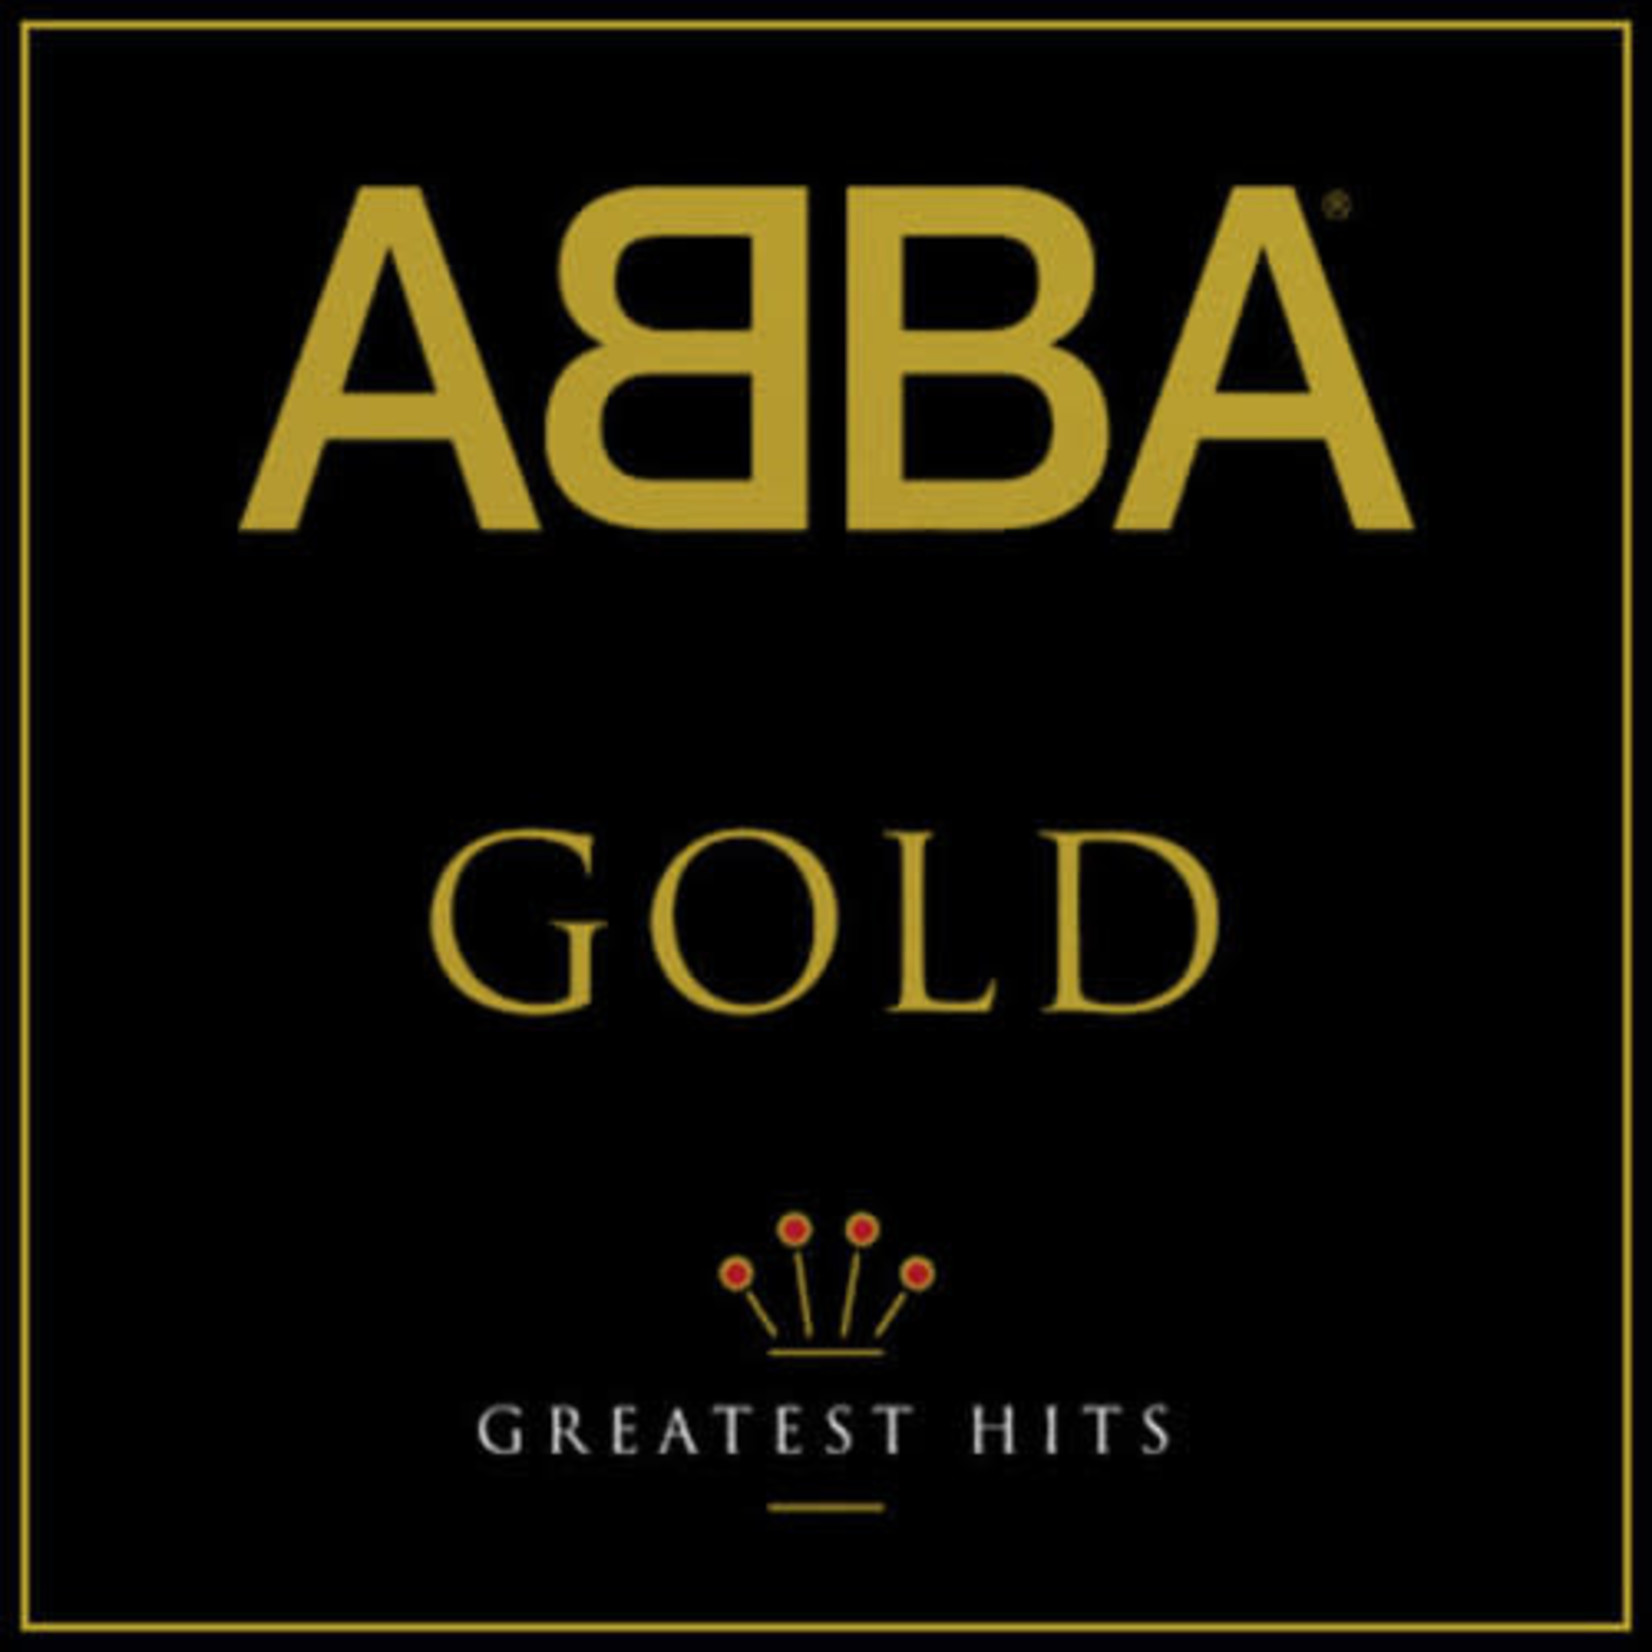 ABBA - Gold: Greatest Hits [2LP]